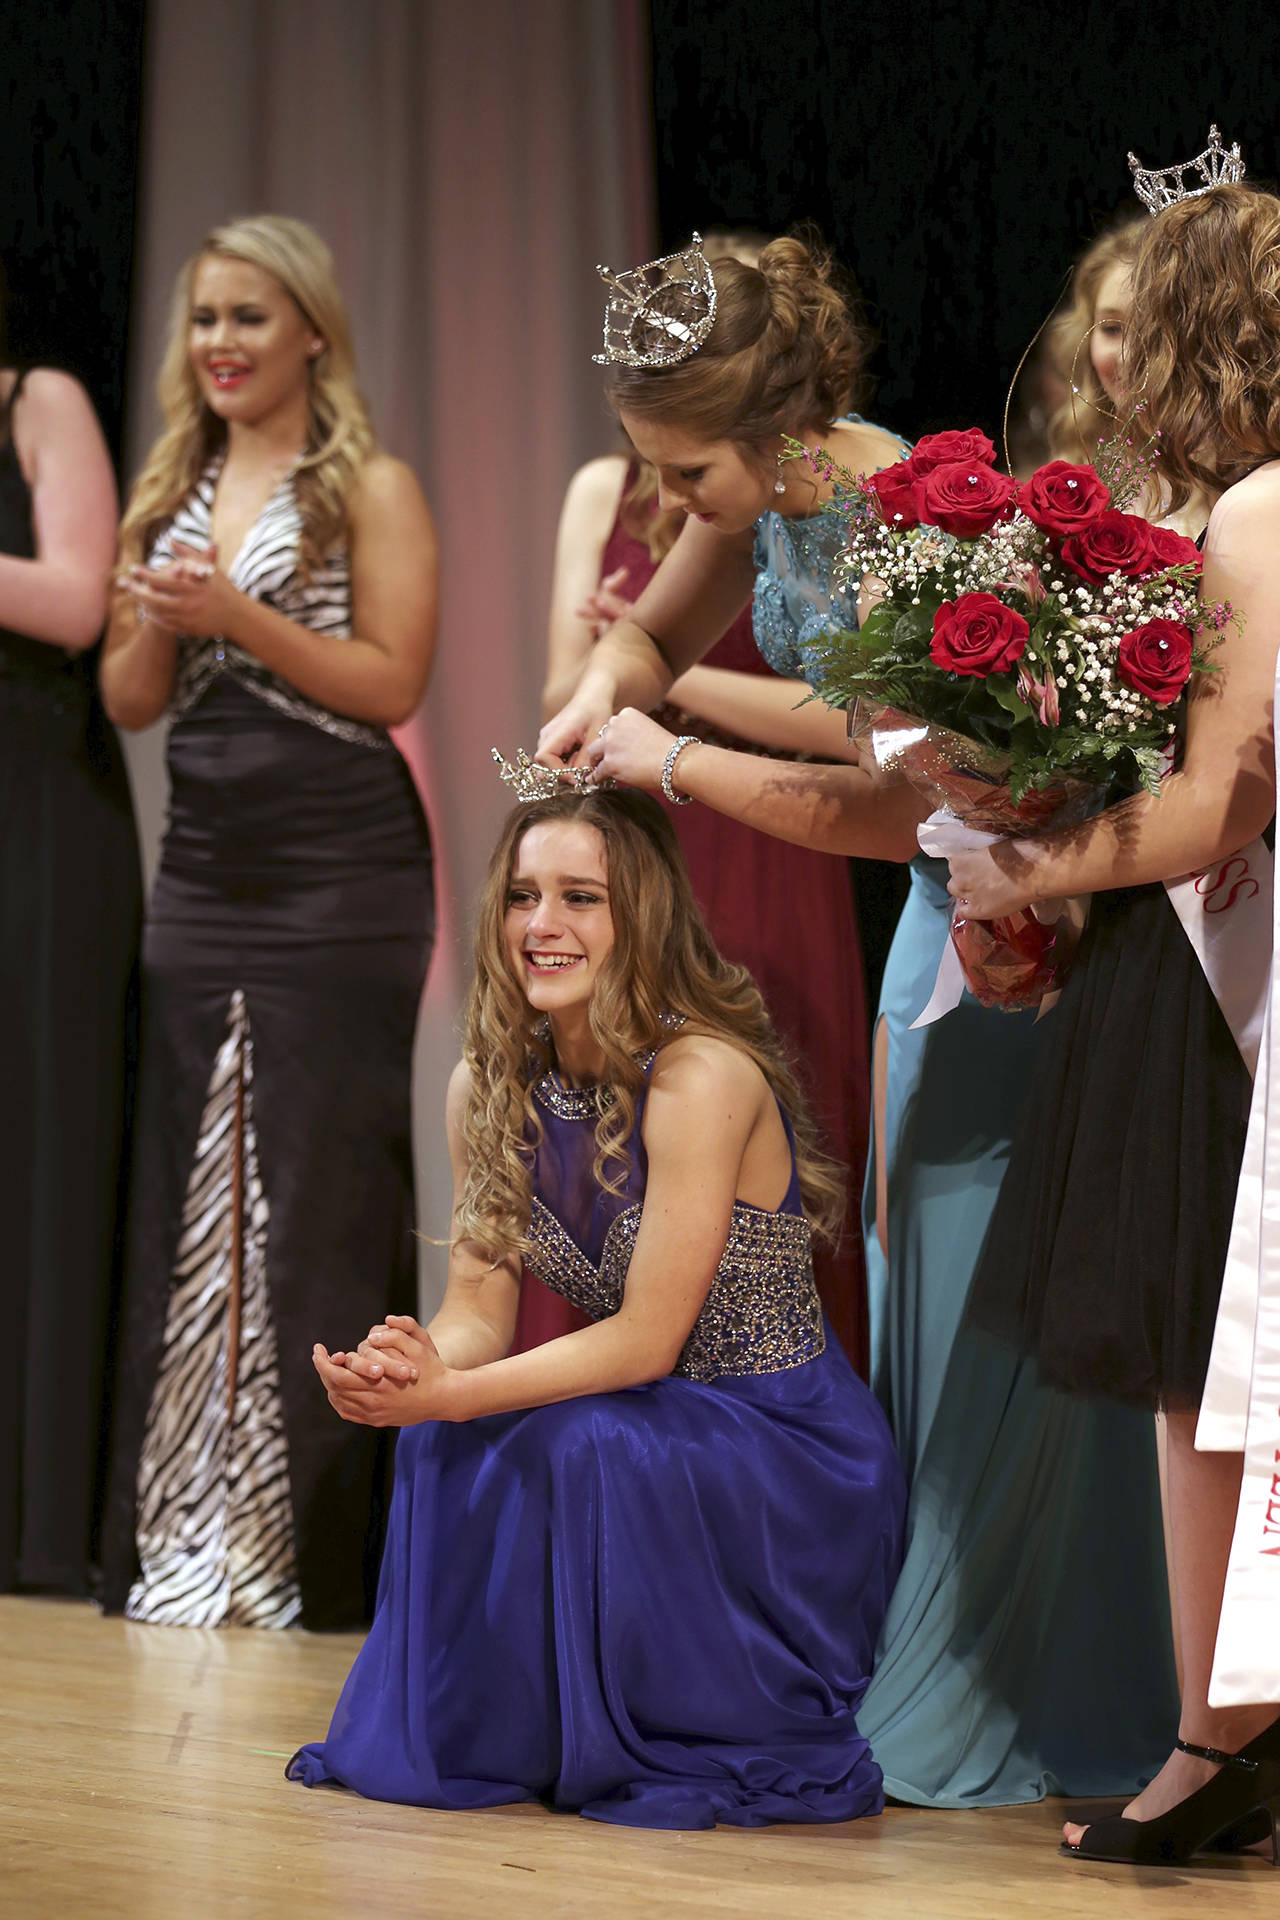 Photo by Keith J. Krueger                                2017 Outstanding Teen Paicyn Dragoo places the crown on 2018 winner Mercedes Morrill at the annual pageant.